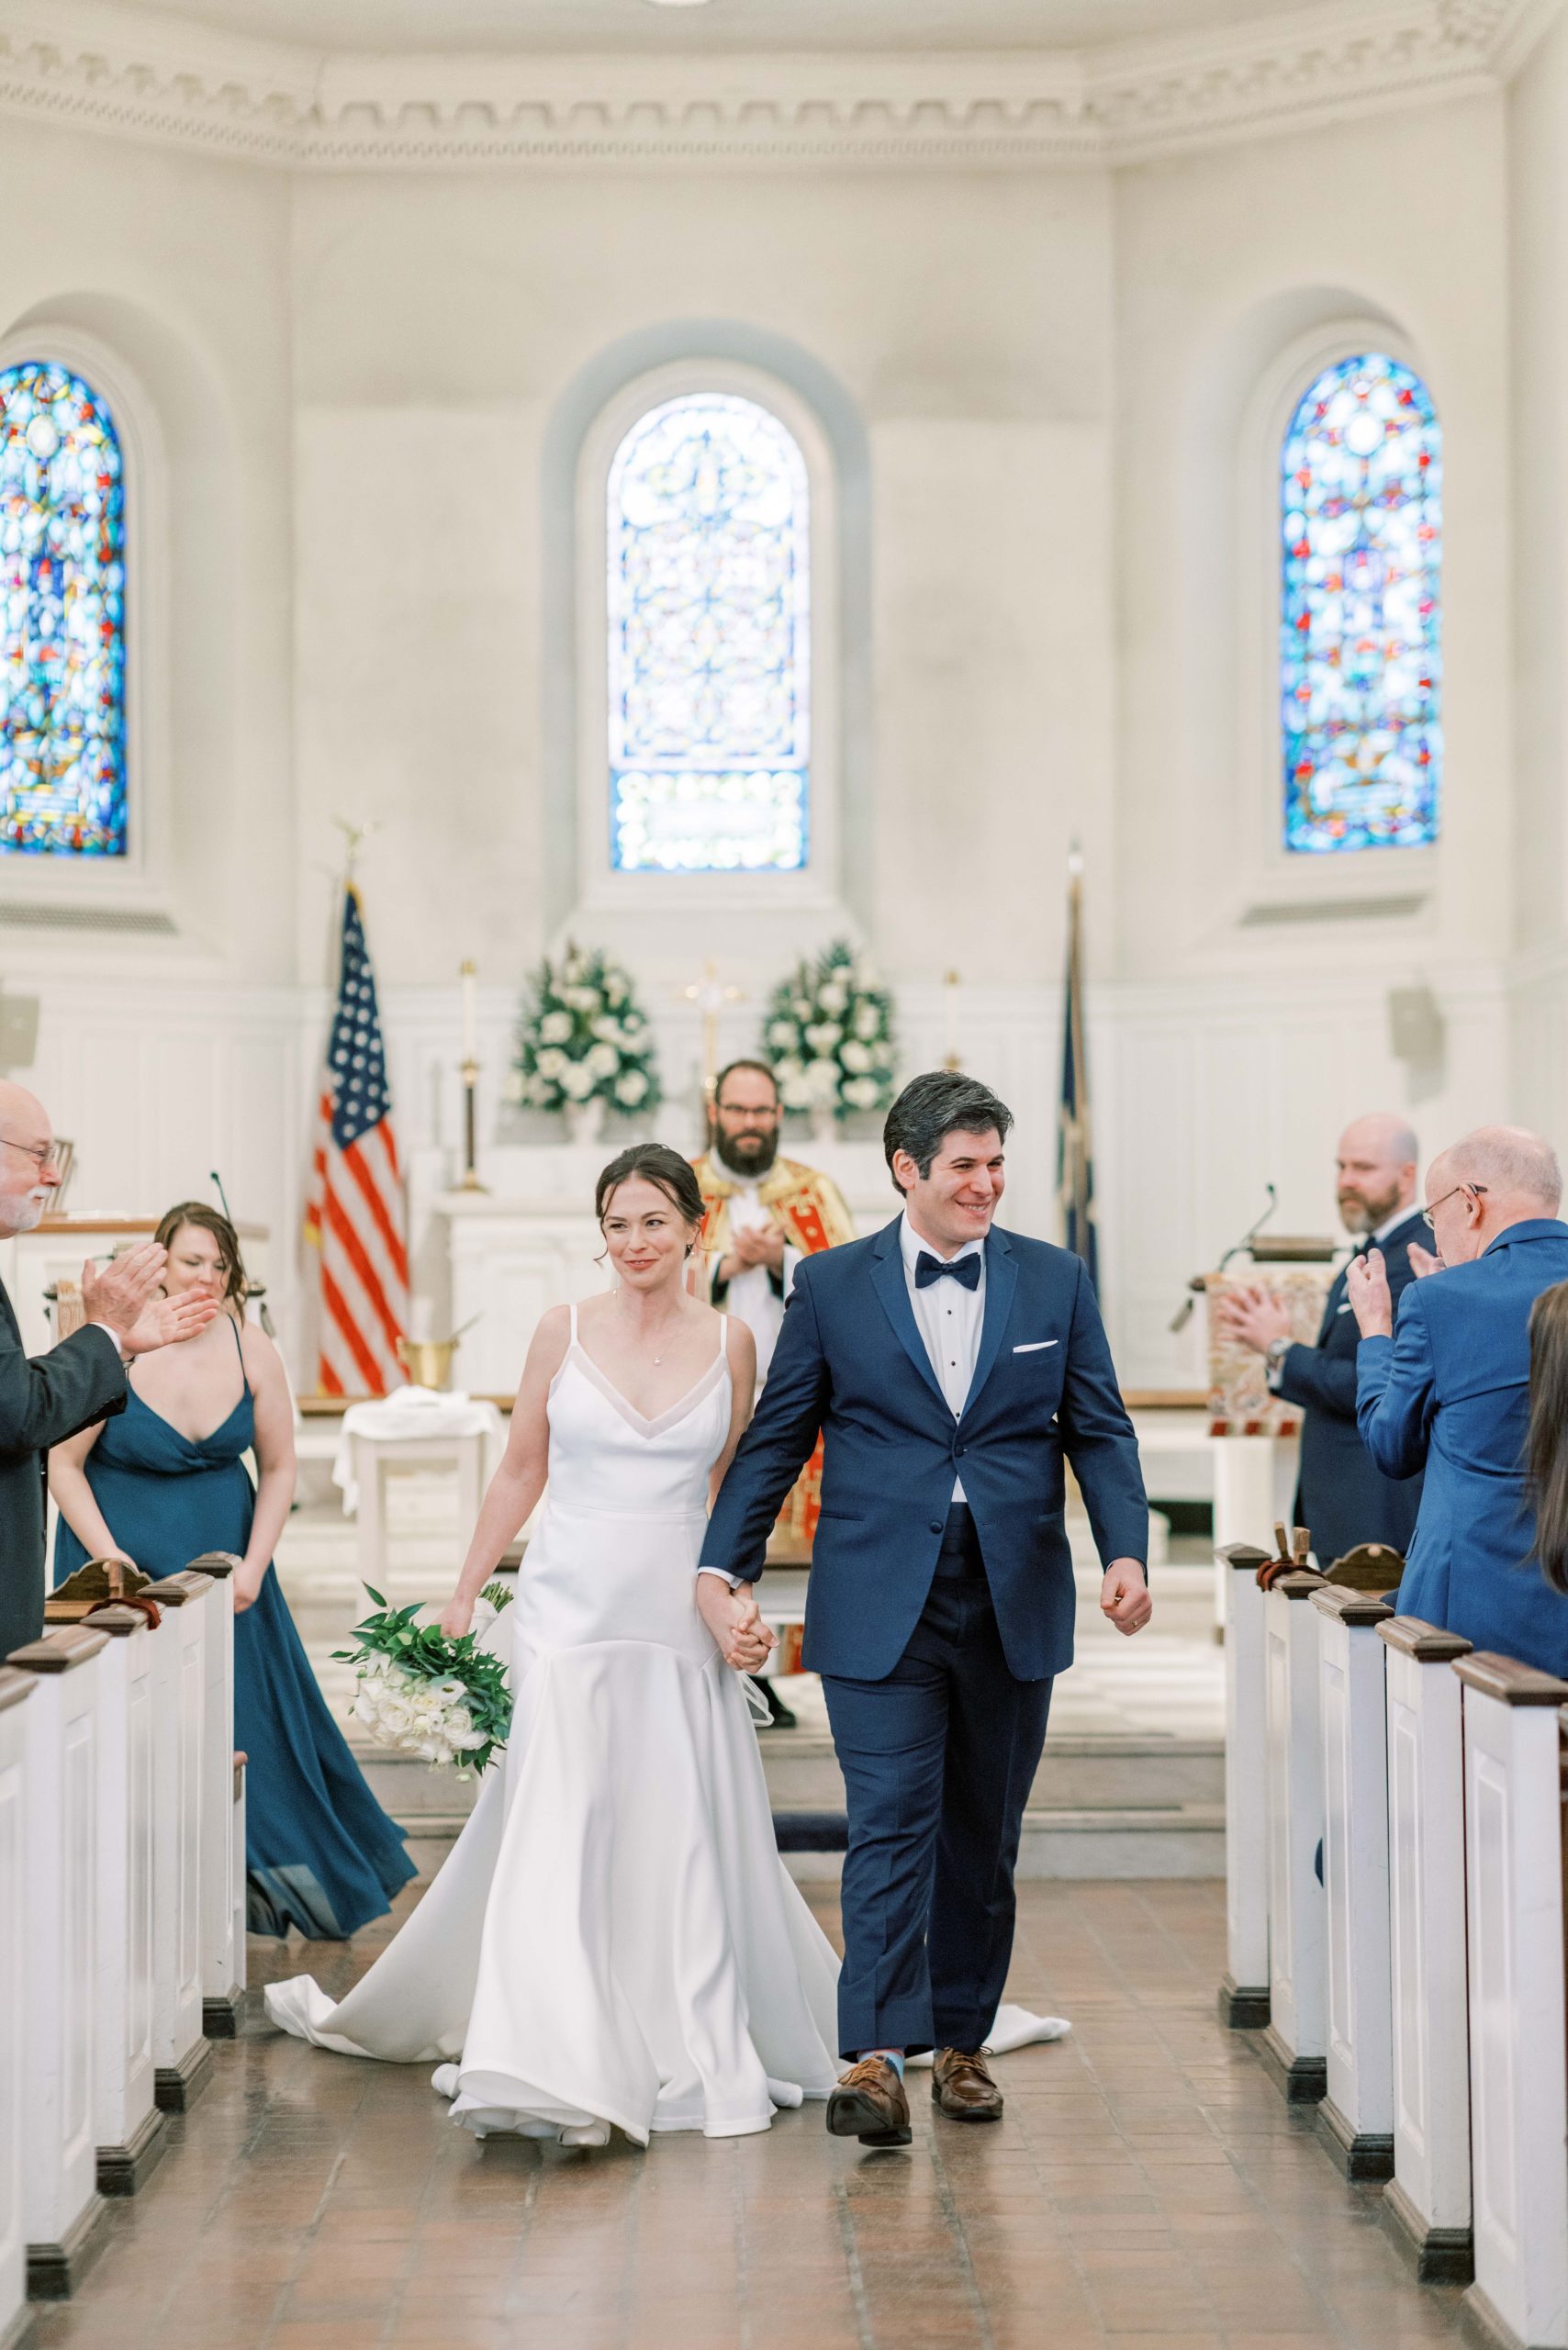 This romantic winter wedding was celebrated at the Army Navy Country Club in Arlington, VA with portraits at the monuments in Washington, DC.